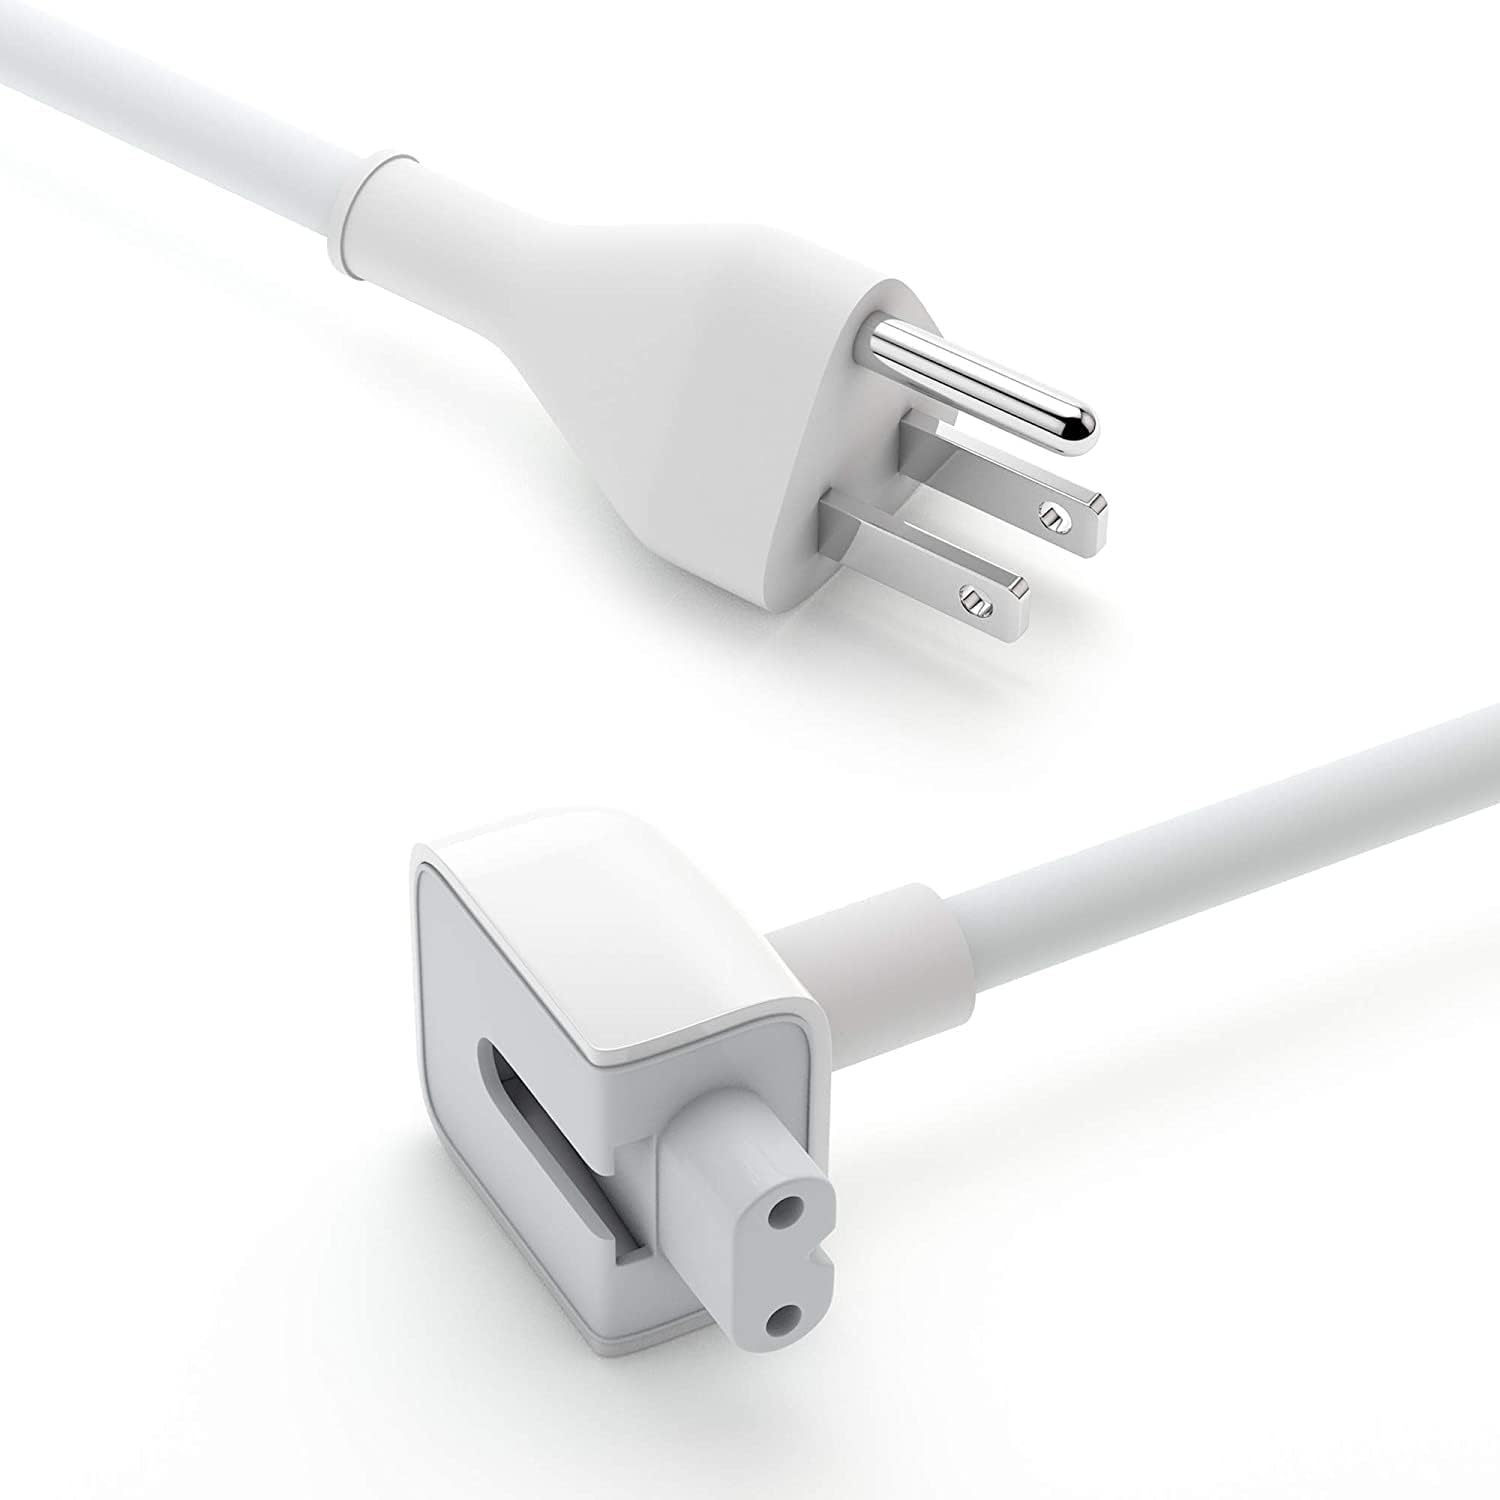 New Replacement Extension Cord for MacBoook Air Pro Chargers